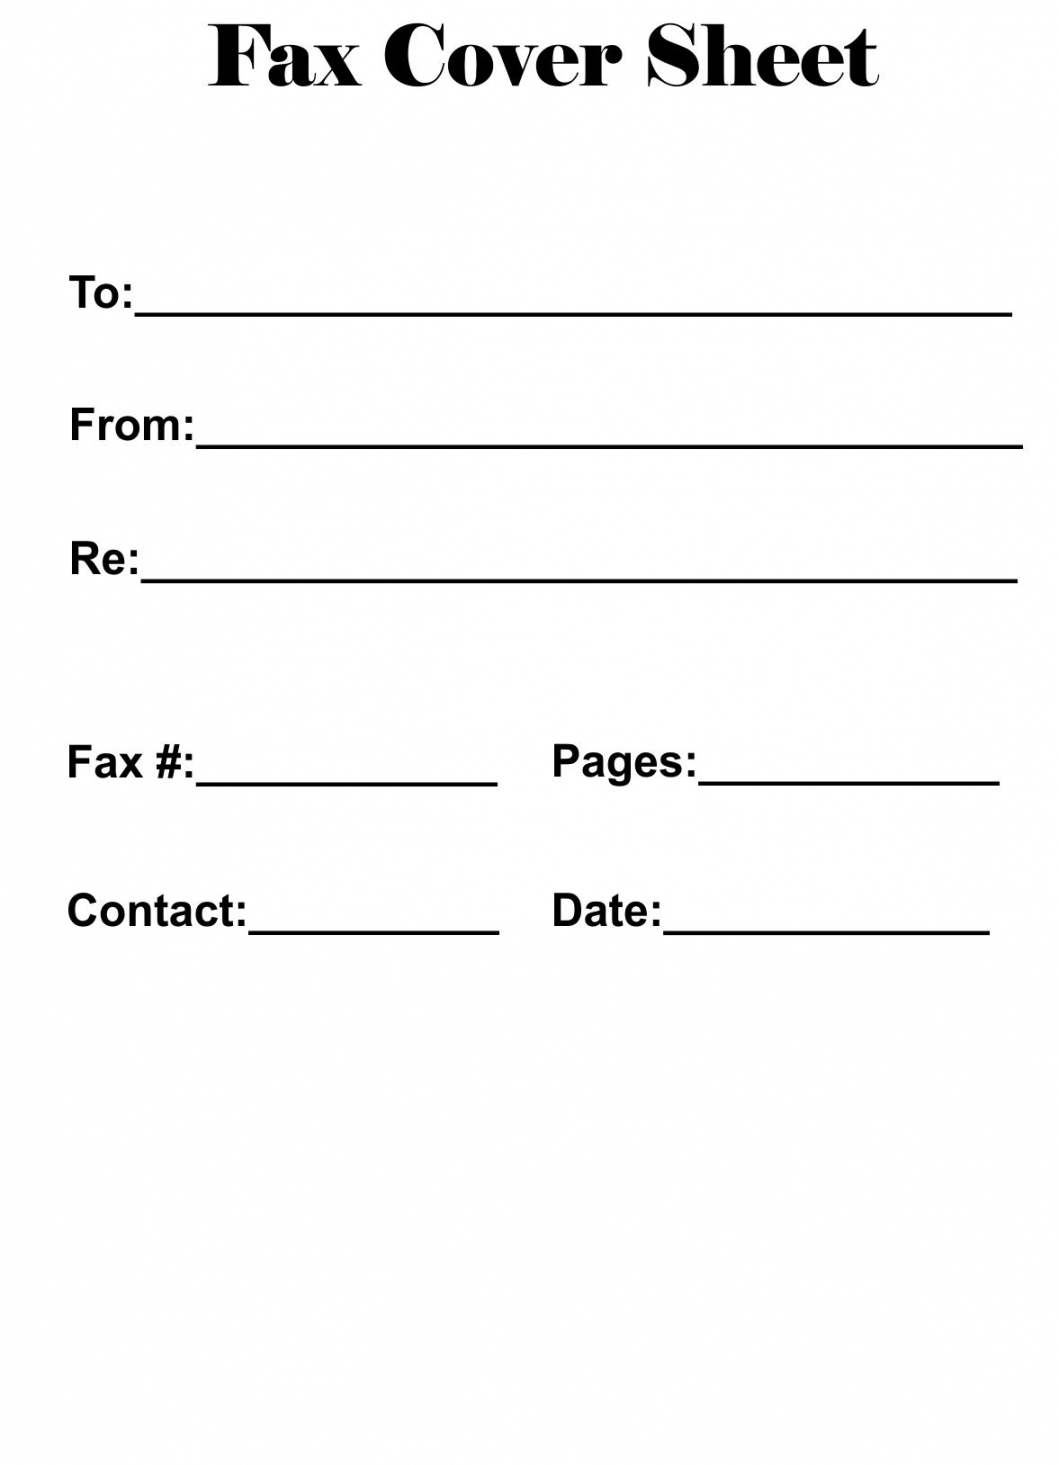 Free Printable Fax Cover Sheet - Printable - Fancy Fax Cover Sheet Template  Fax cover sheet, Cover sheet